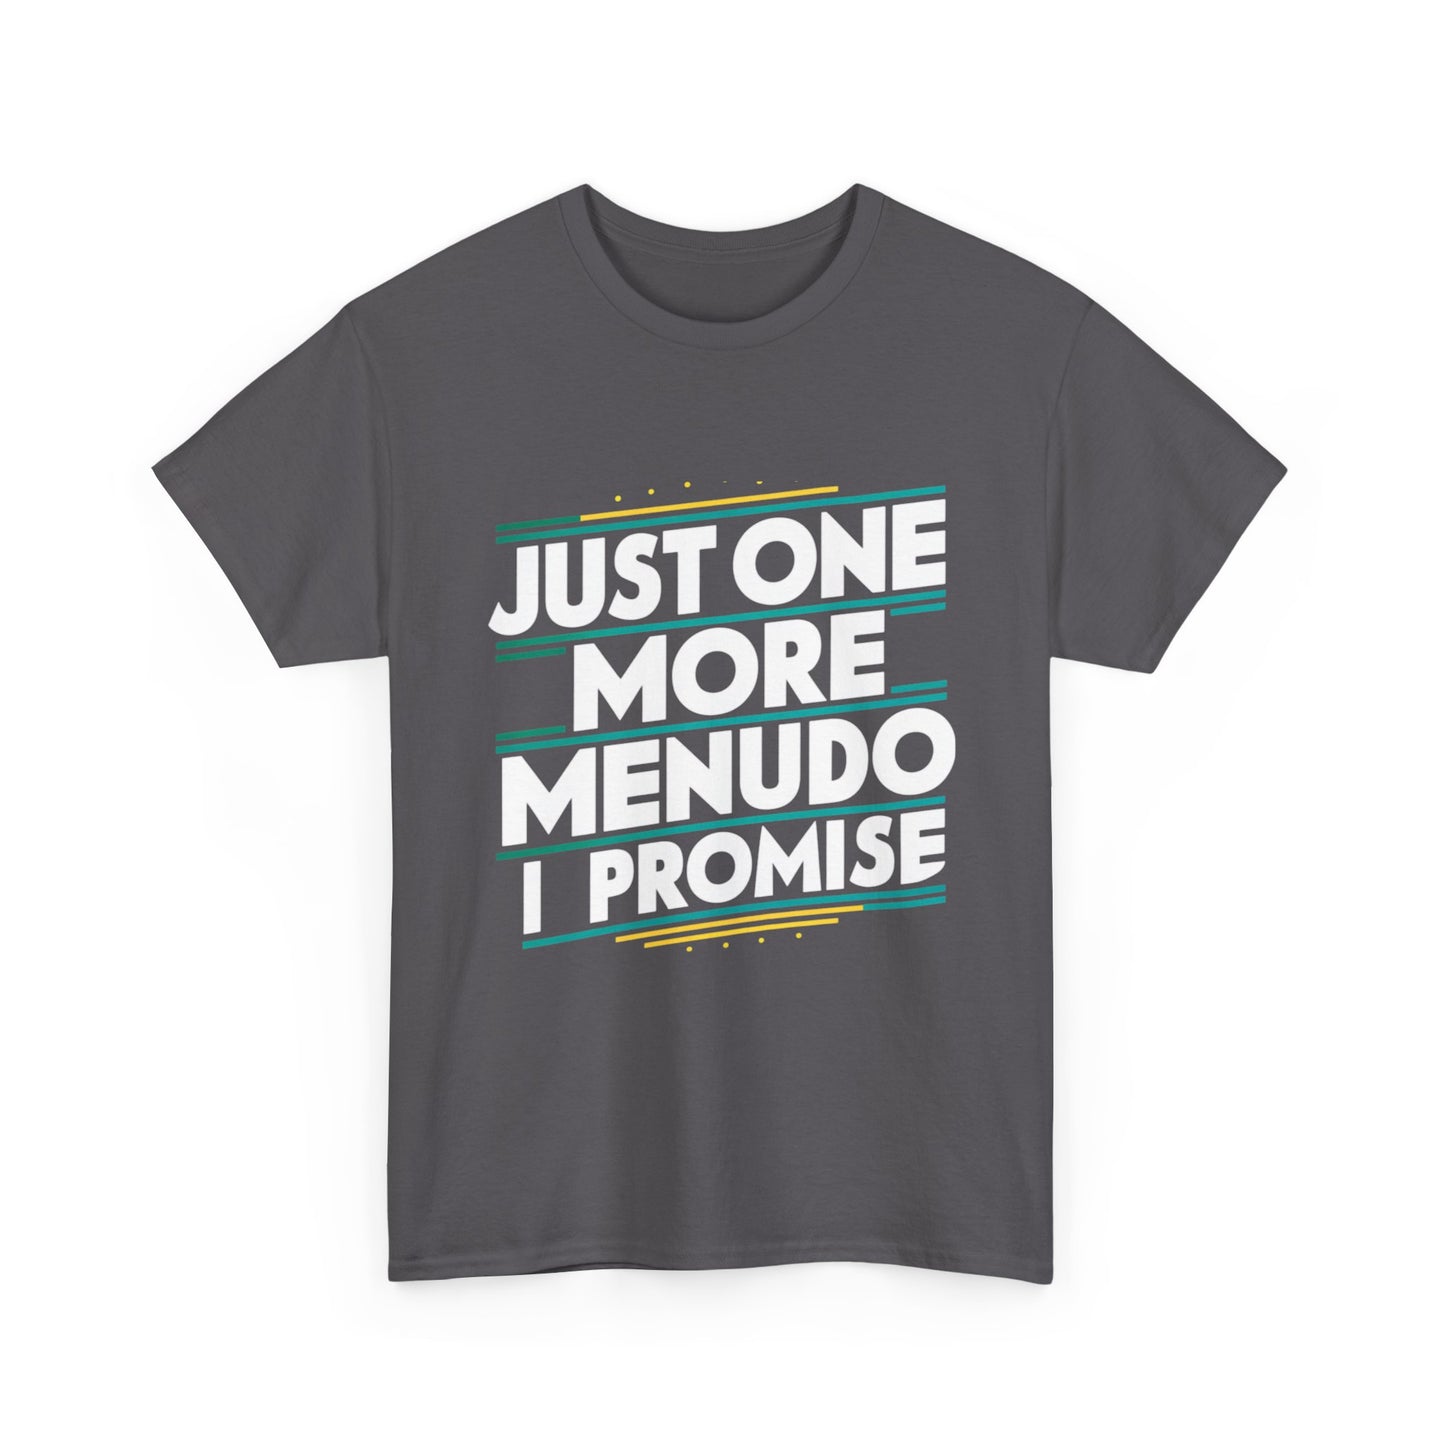 Just One More Menudo I Promise Mexican Food Graphic Unisex Heavy Cotton Tee Cotton Funny Humorous Graphic Soft Premium Unisex Men Women Charcoal T-shirt Birthday Gift-18